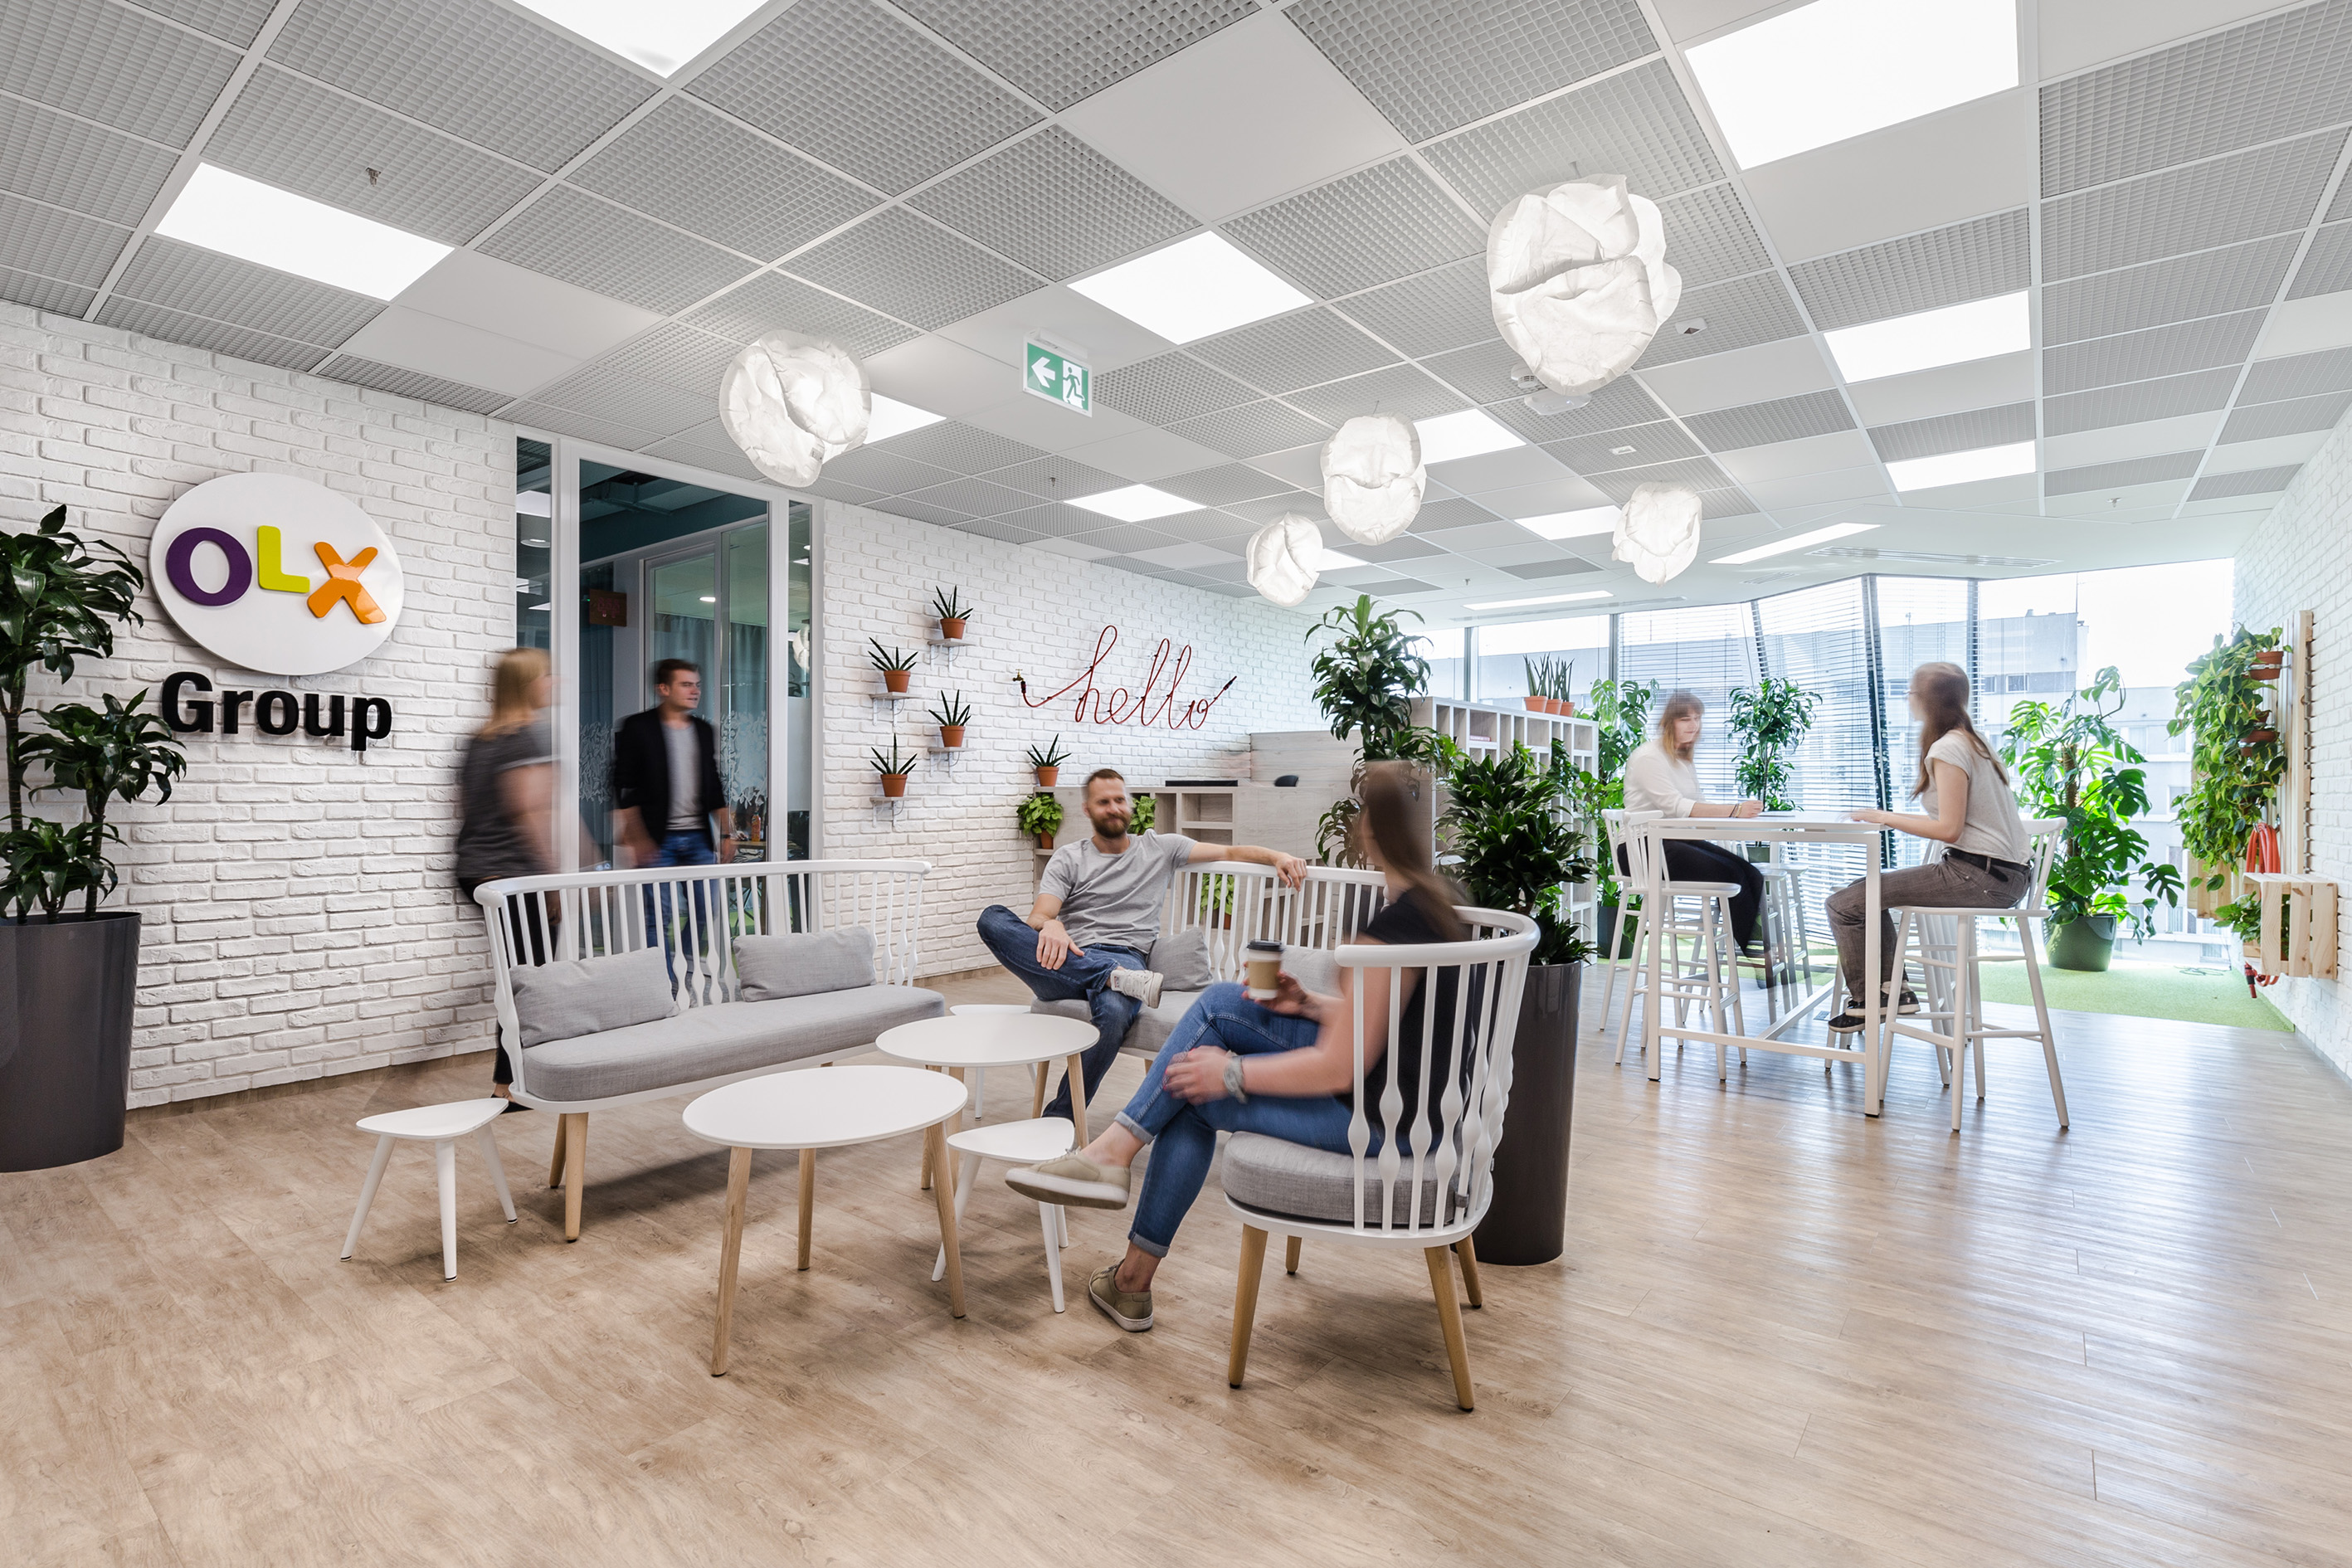 Local Office | OLX in Warsaw